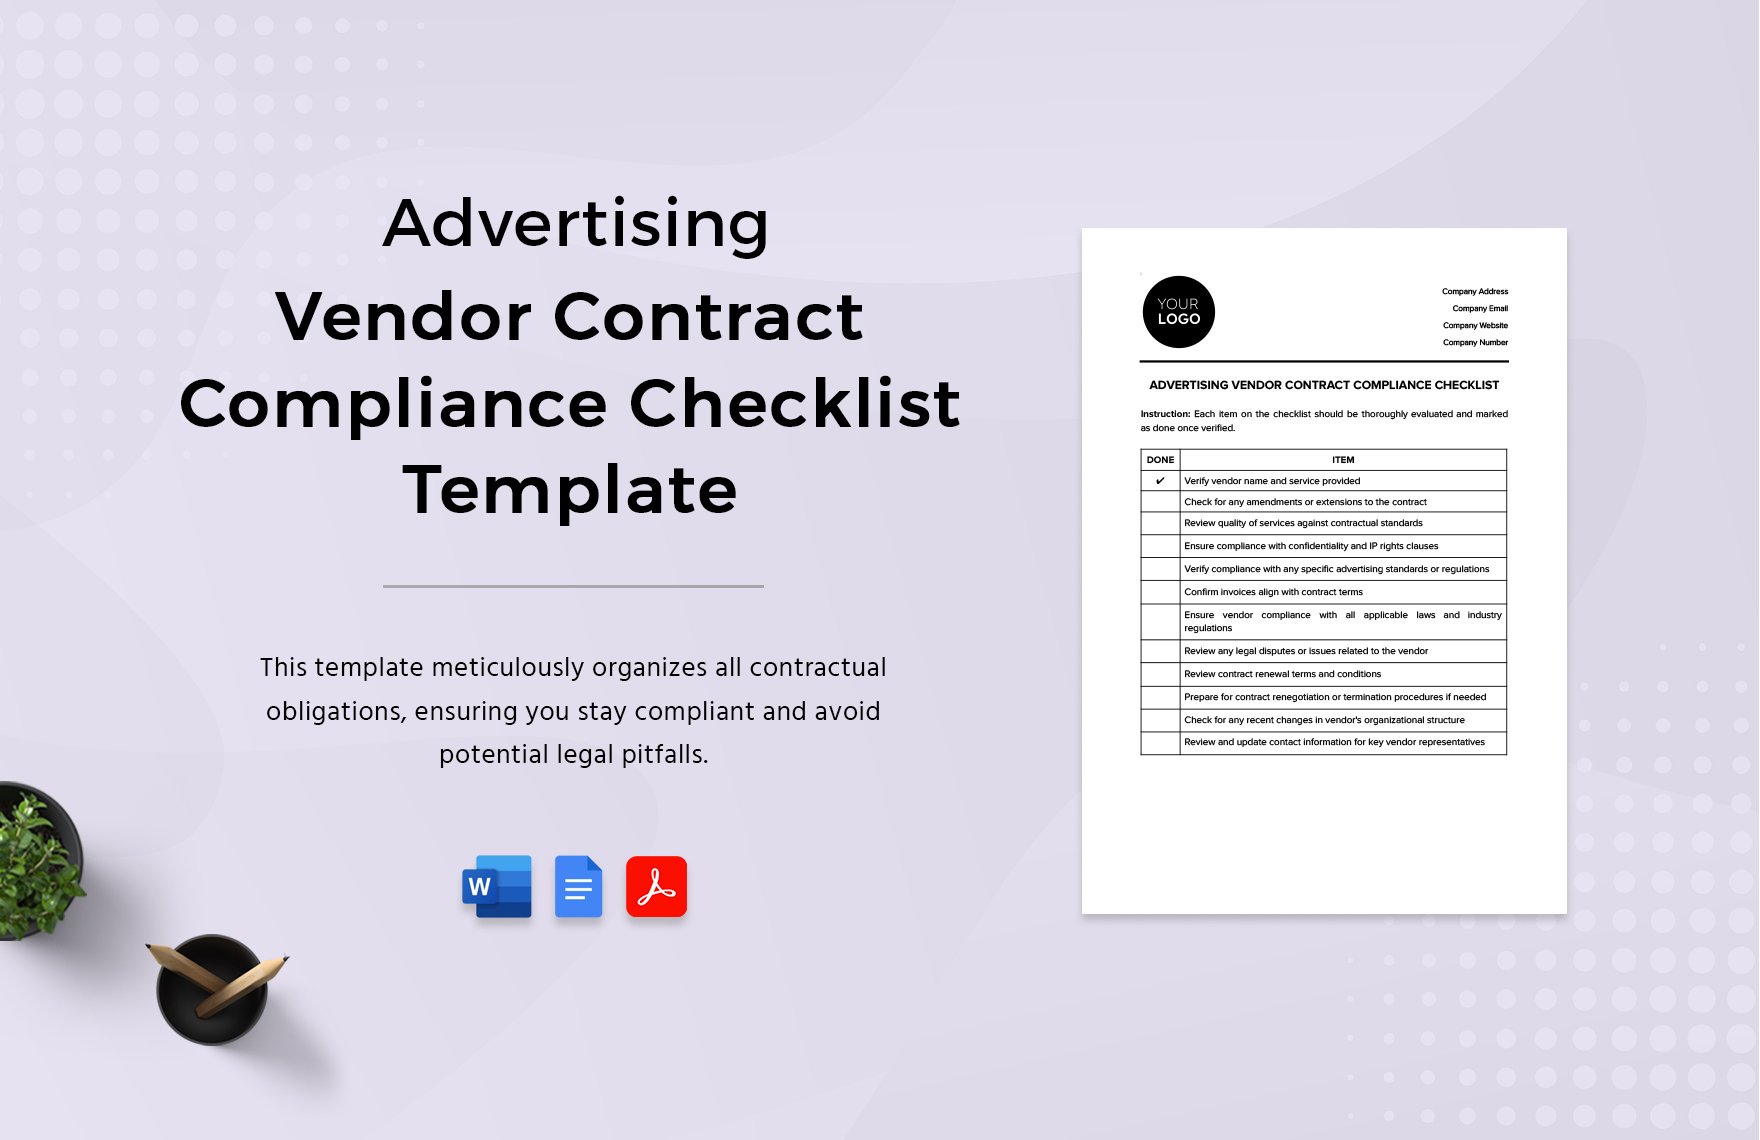 Advertising Vendor Contract Compliance Checklist Template in Word, Google Docs, PDF